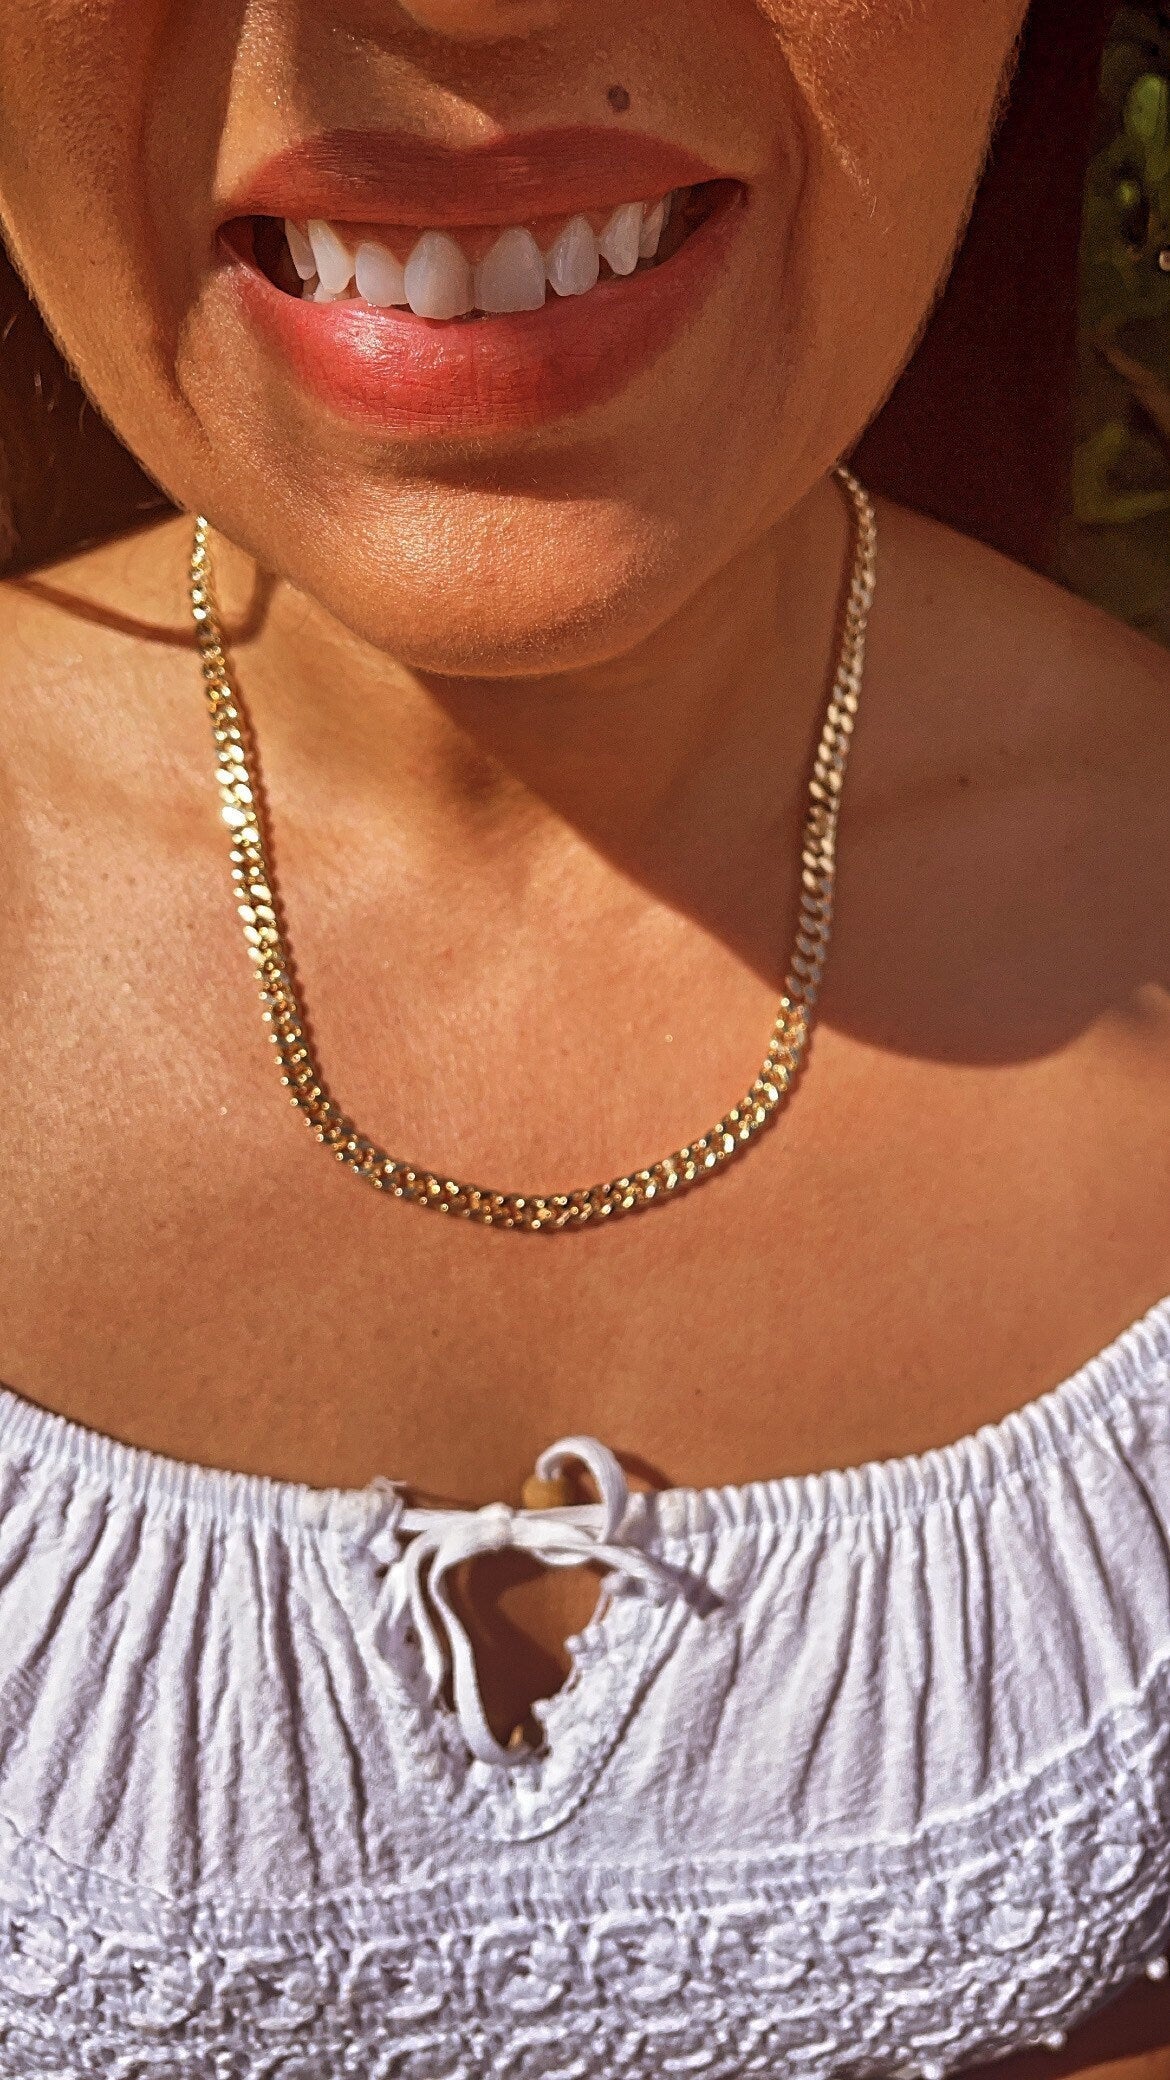 18k Gold Layered 6mm Cuban Link Chain, Miami Cuban Available Necklace and